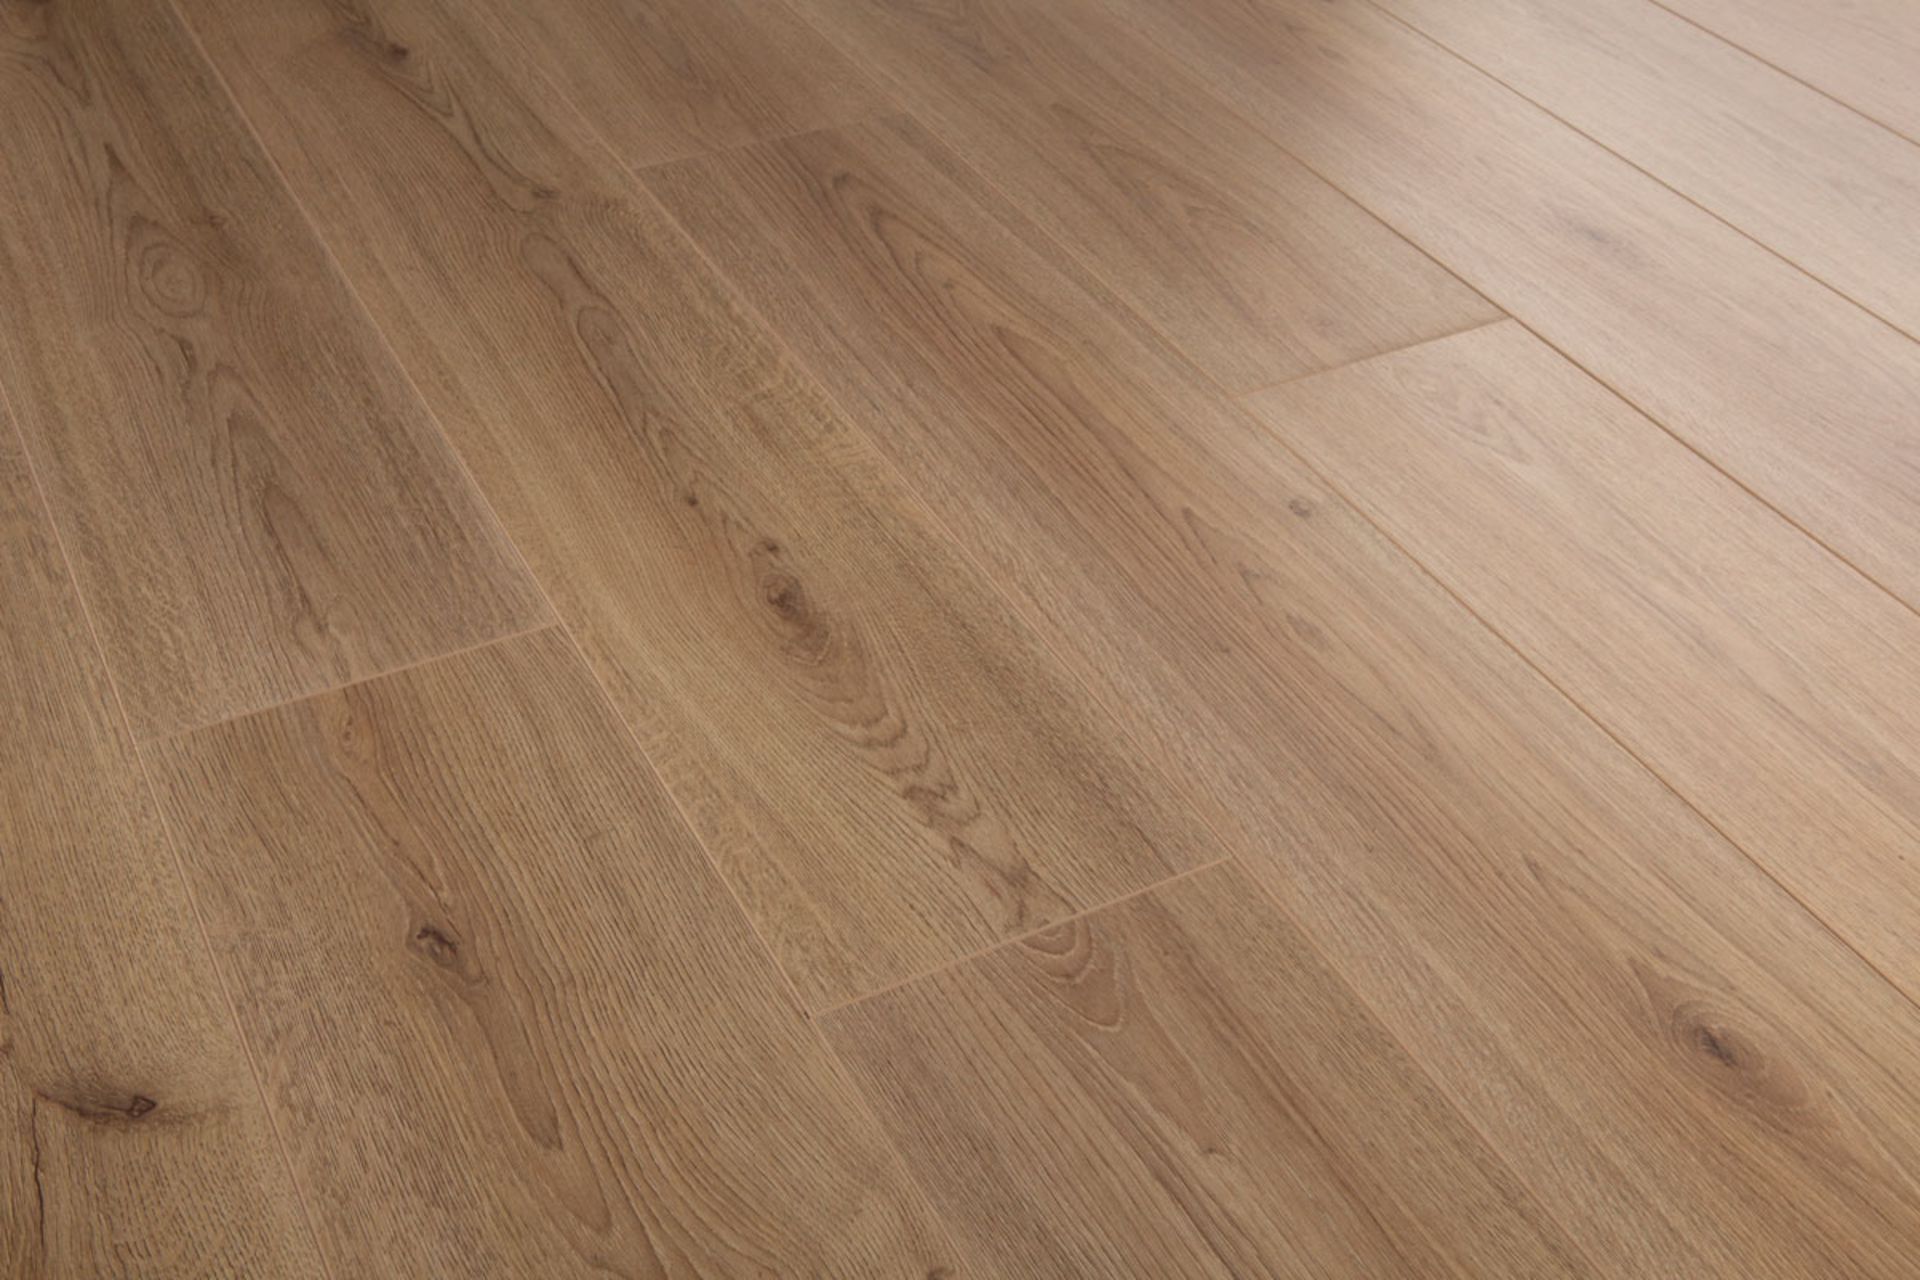 NEW 9.56m2 LAMINATE FLOORING TREND NATURE OAK. With a warm natural tone and a complex grain - Image 2 of 3